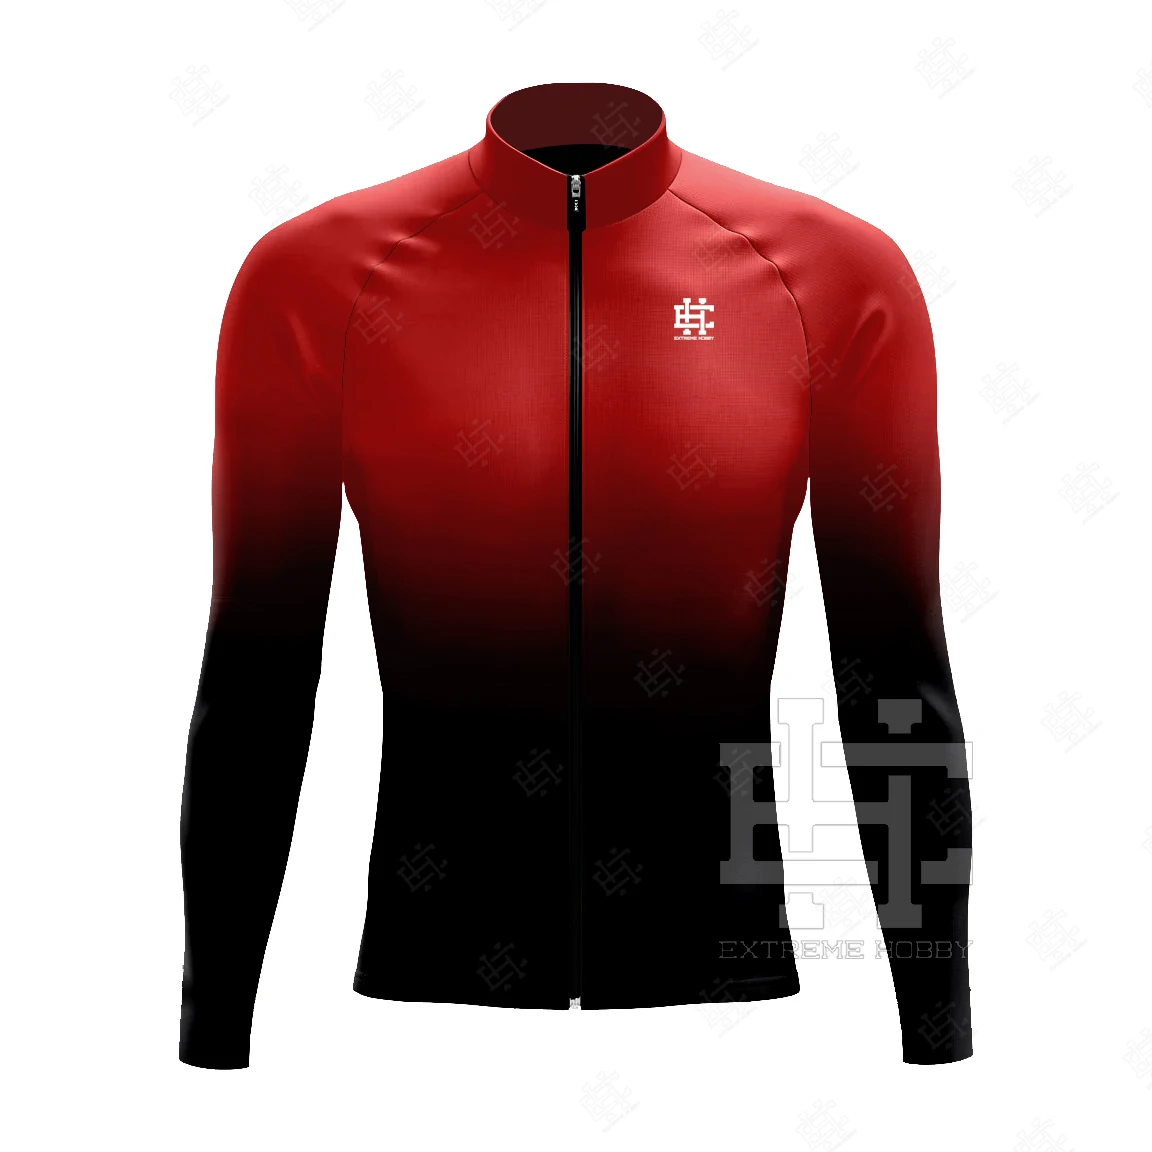 

EXTREME HOBBY Winter Thermal Fleece Cycling Jersey Men Bike Long Sleeve Warm Tops Ropa Ciclismo Hombre Outdoor Bicycle Jackets